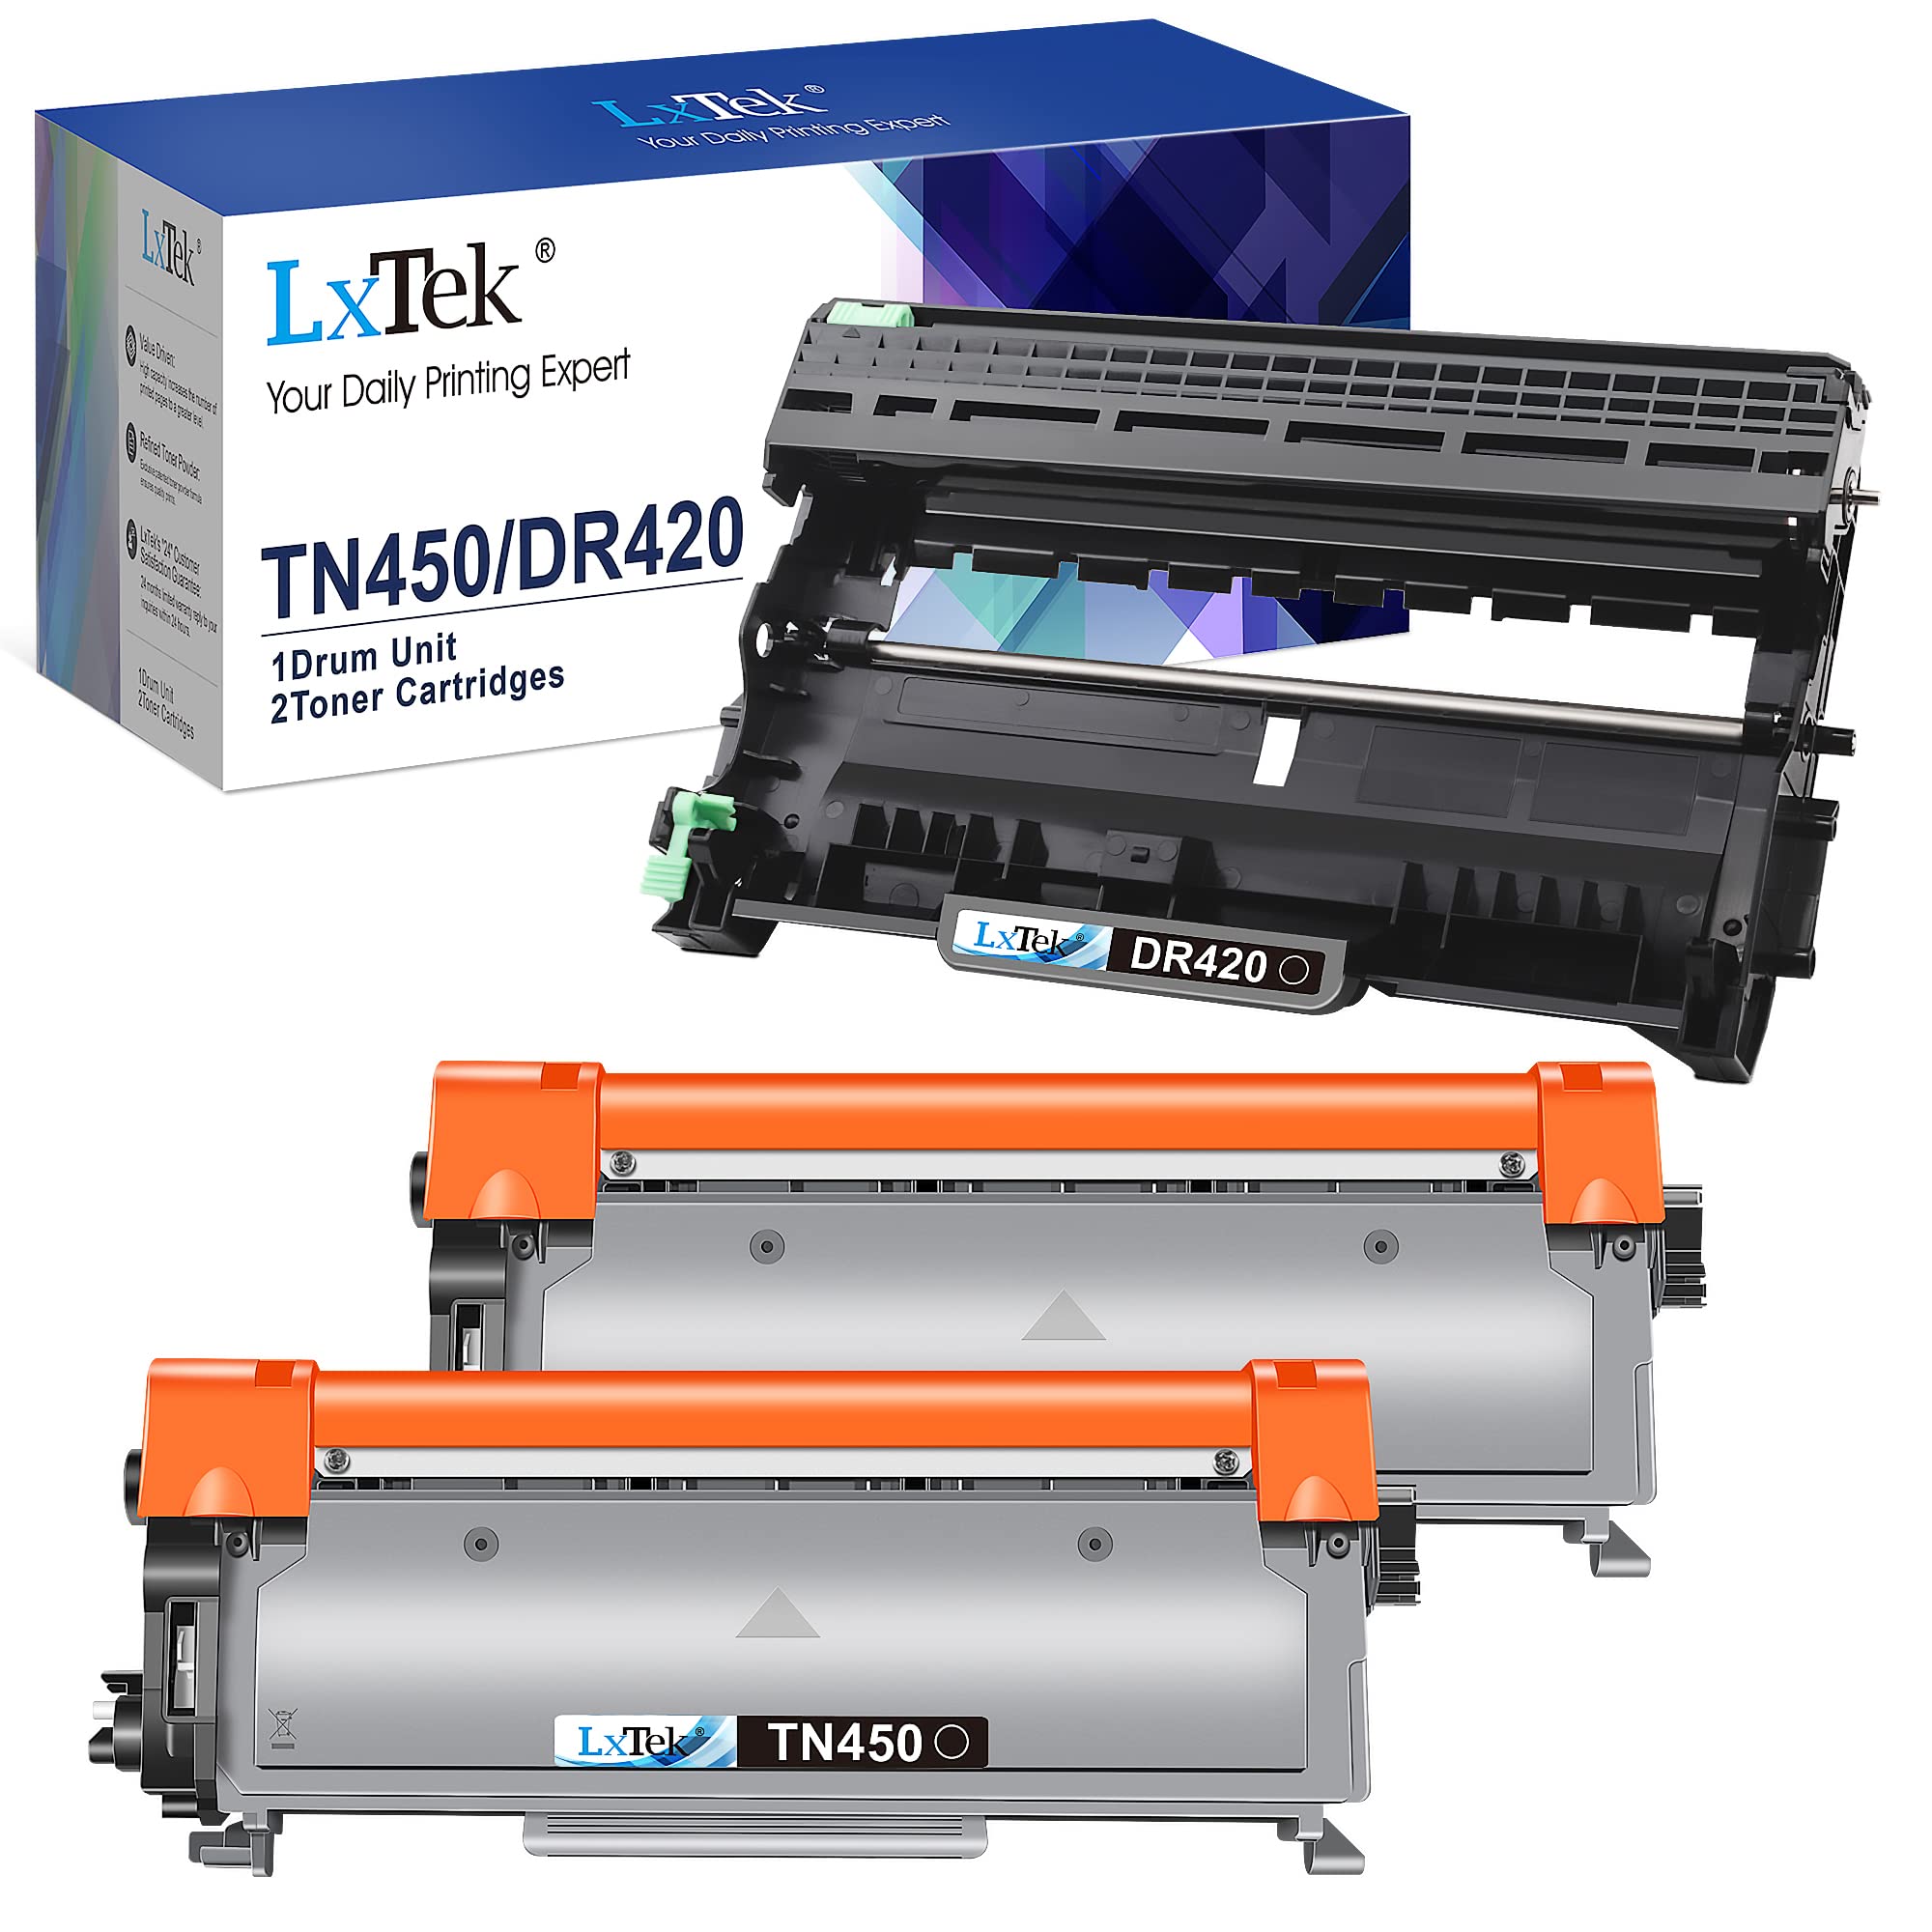 Looking to Buy TN450 Toner. 4 Must-Know Facts Before You Shop